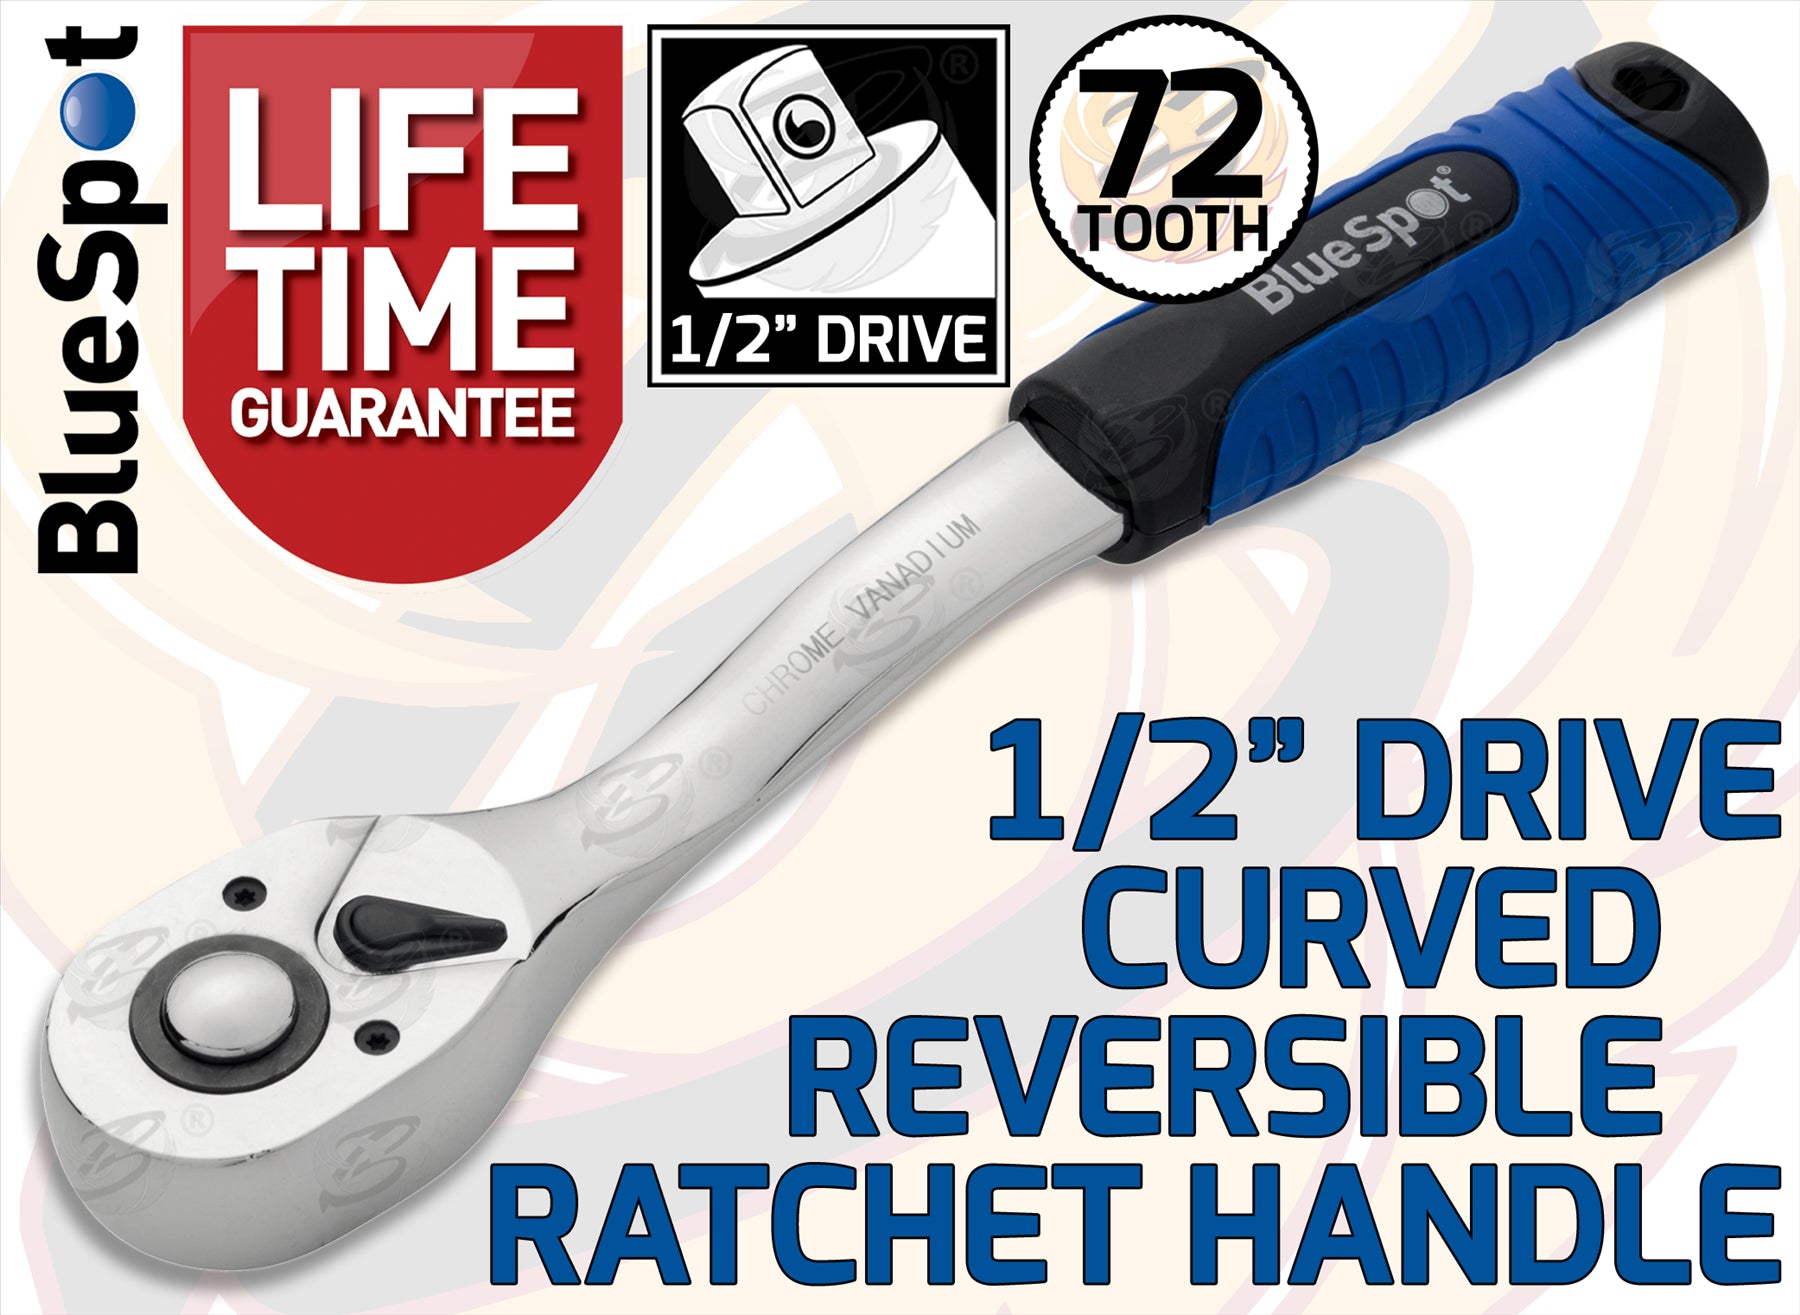 BLUESPOT 1/2" DRIVE 72 TOOTH SOFT GRIP CURVED RATCHET HANDLE